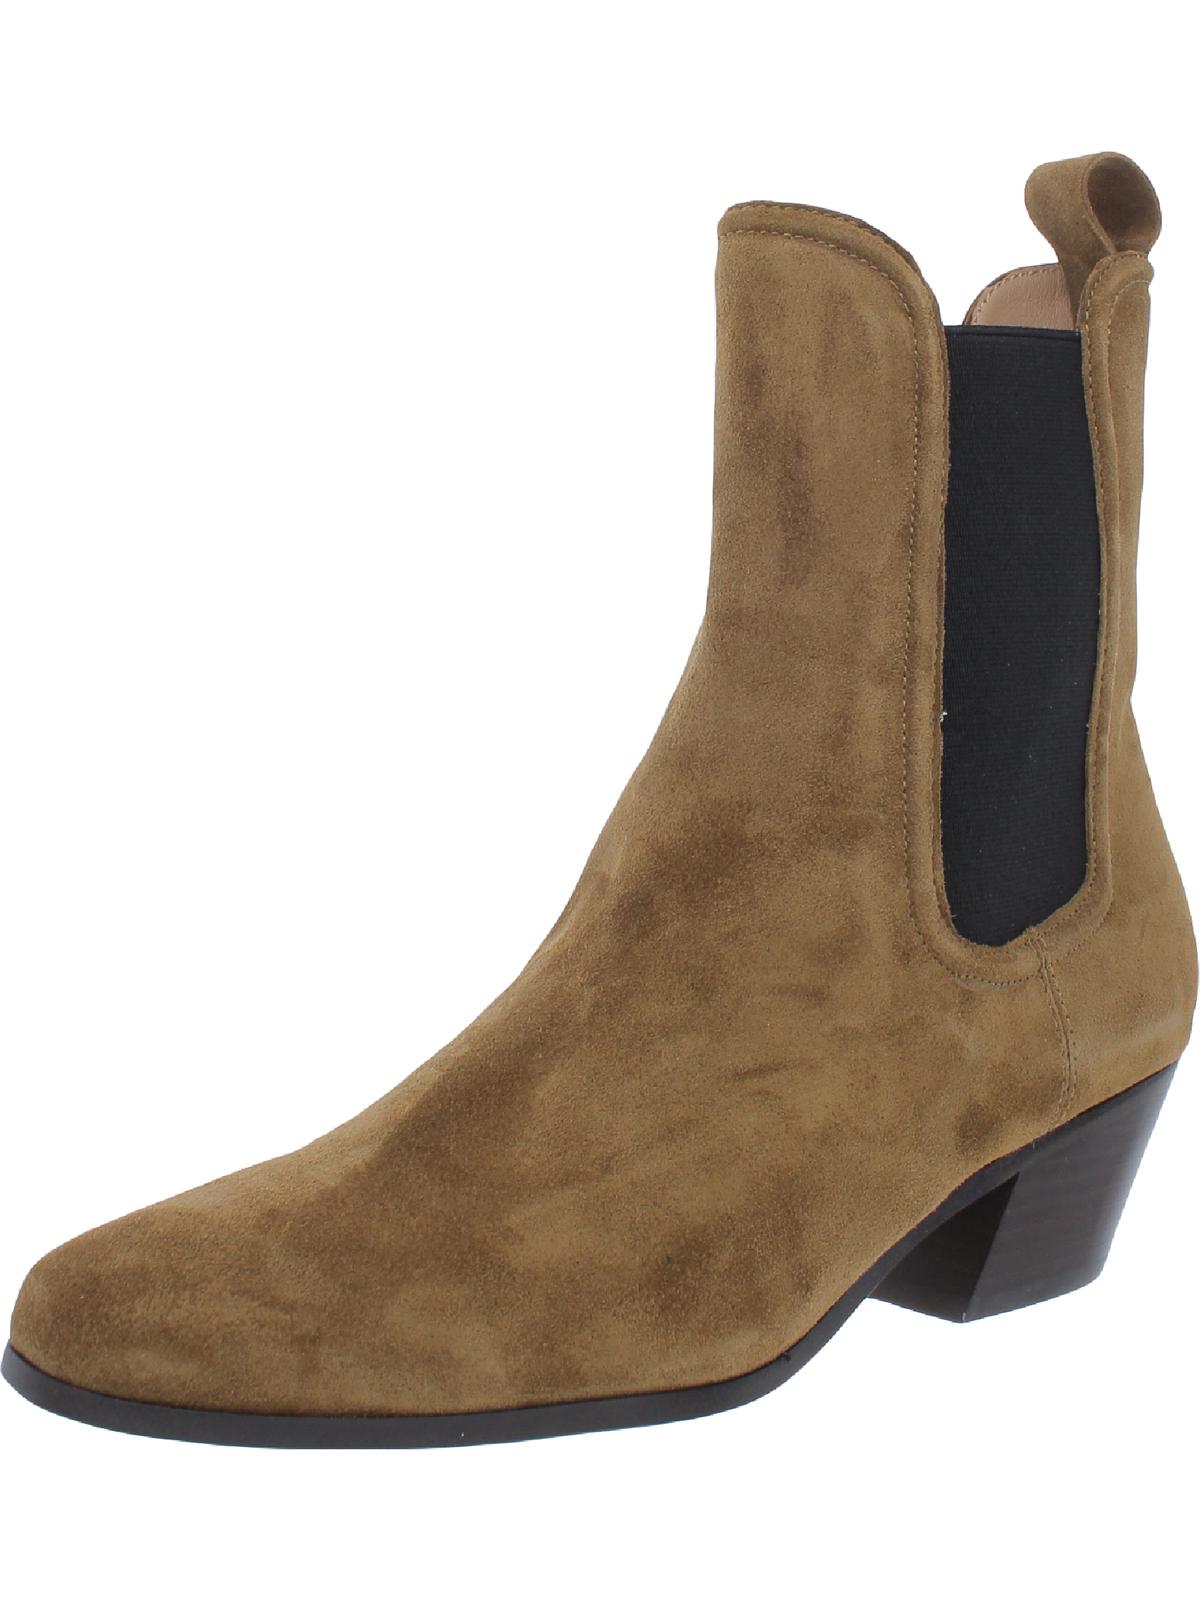 VERONICA BEARD Lada Womens Suede Ankle Chelsea Boots